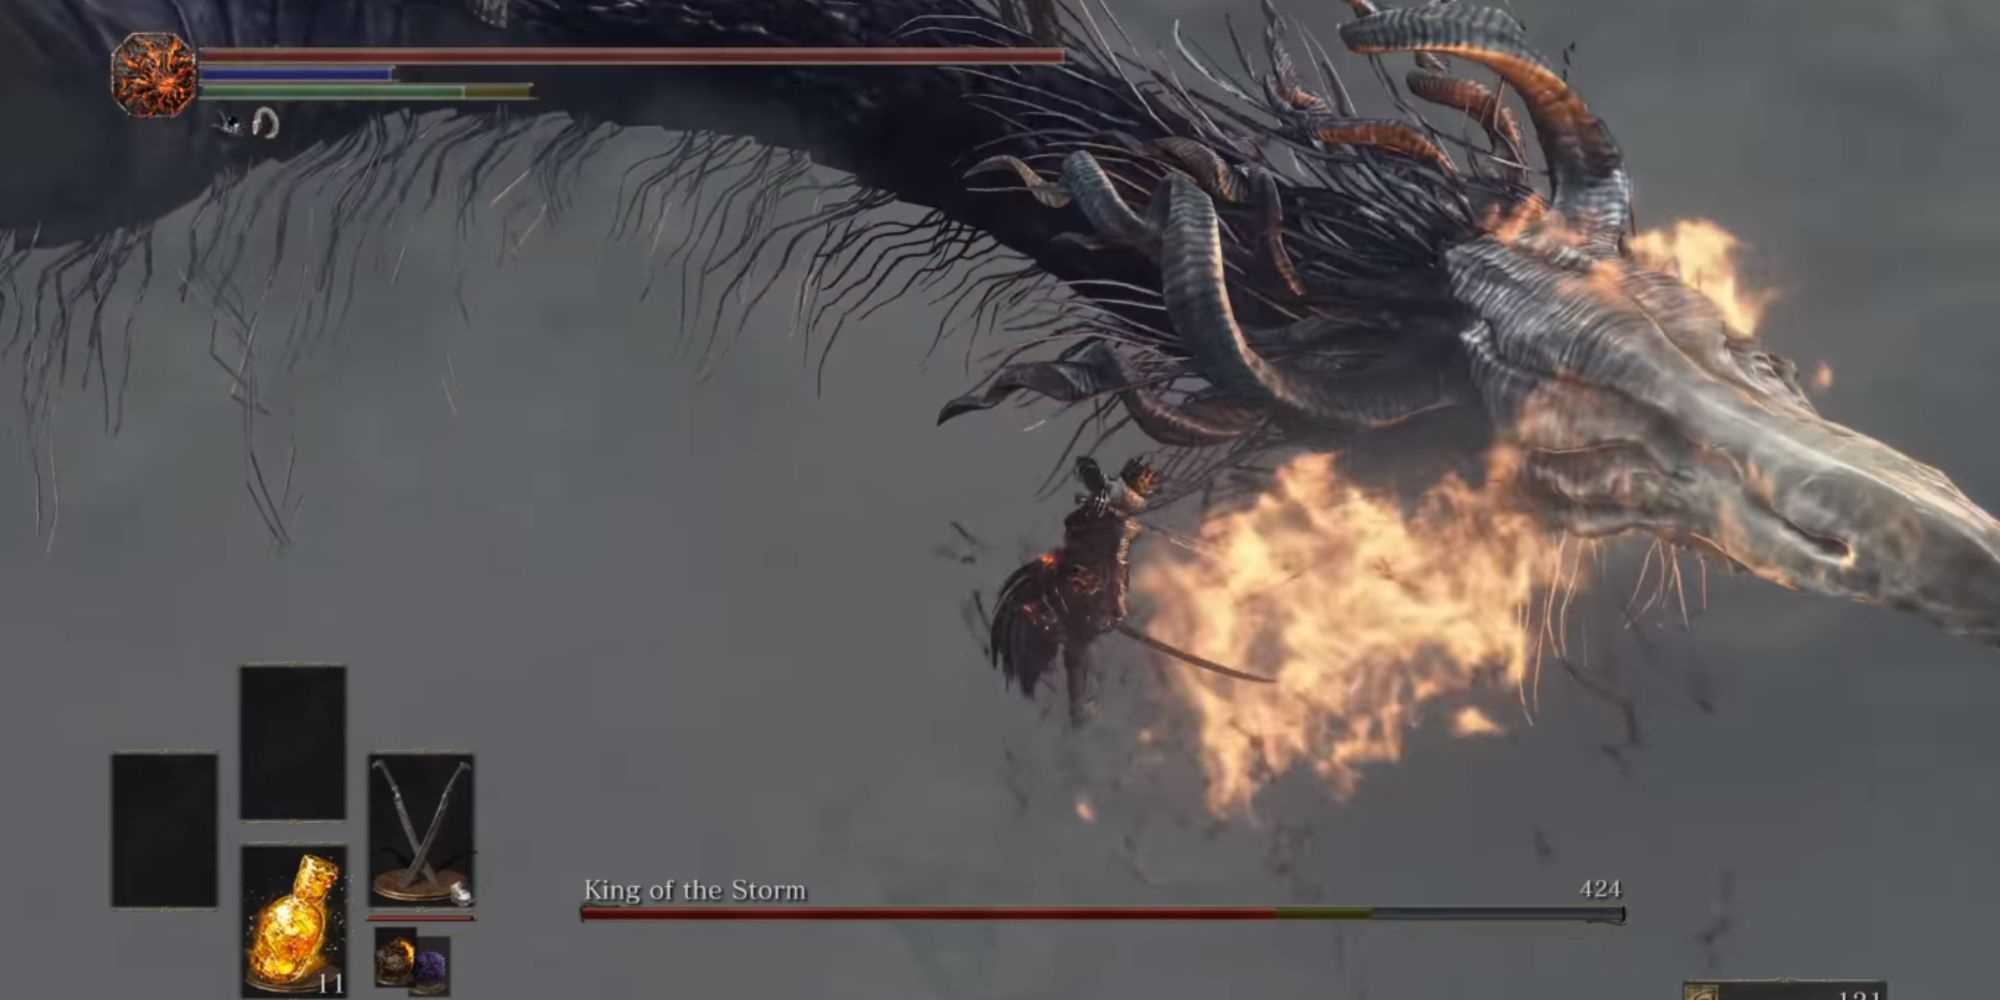 The player jumping and attacking the Wyvern.